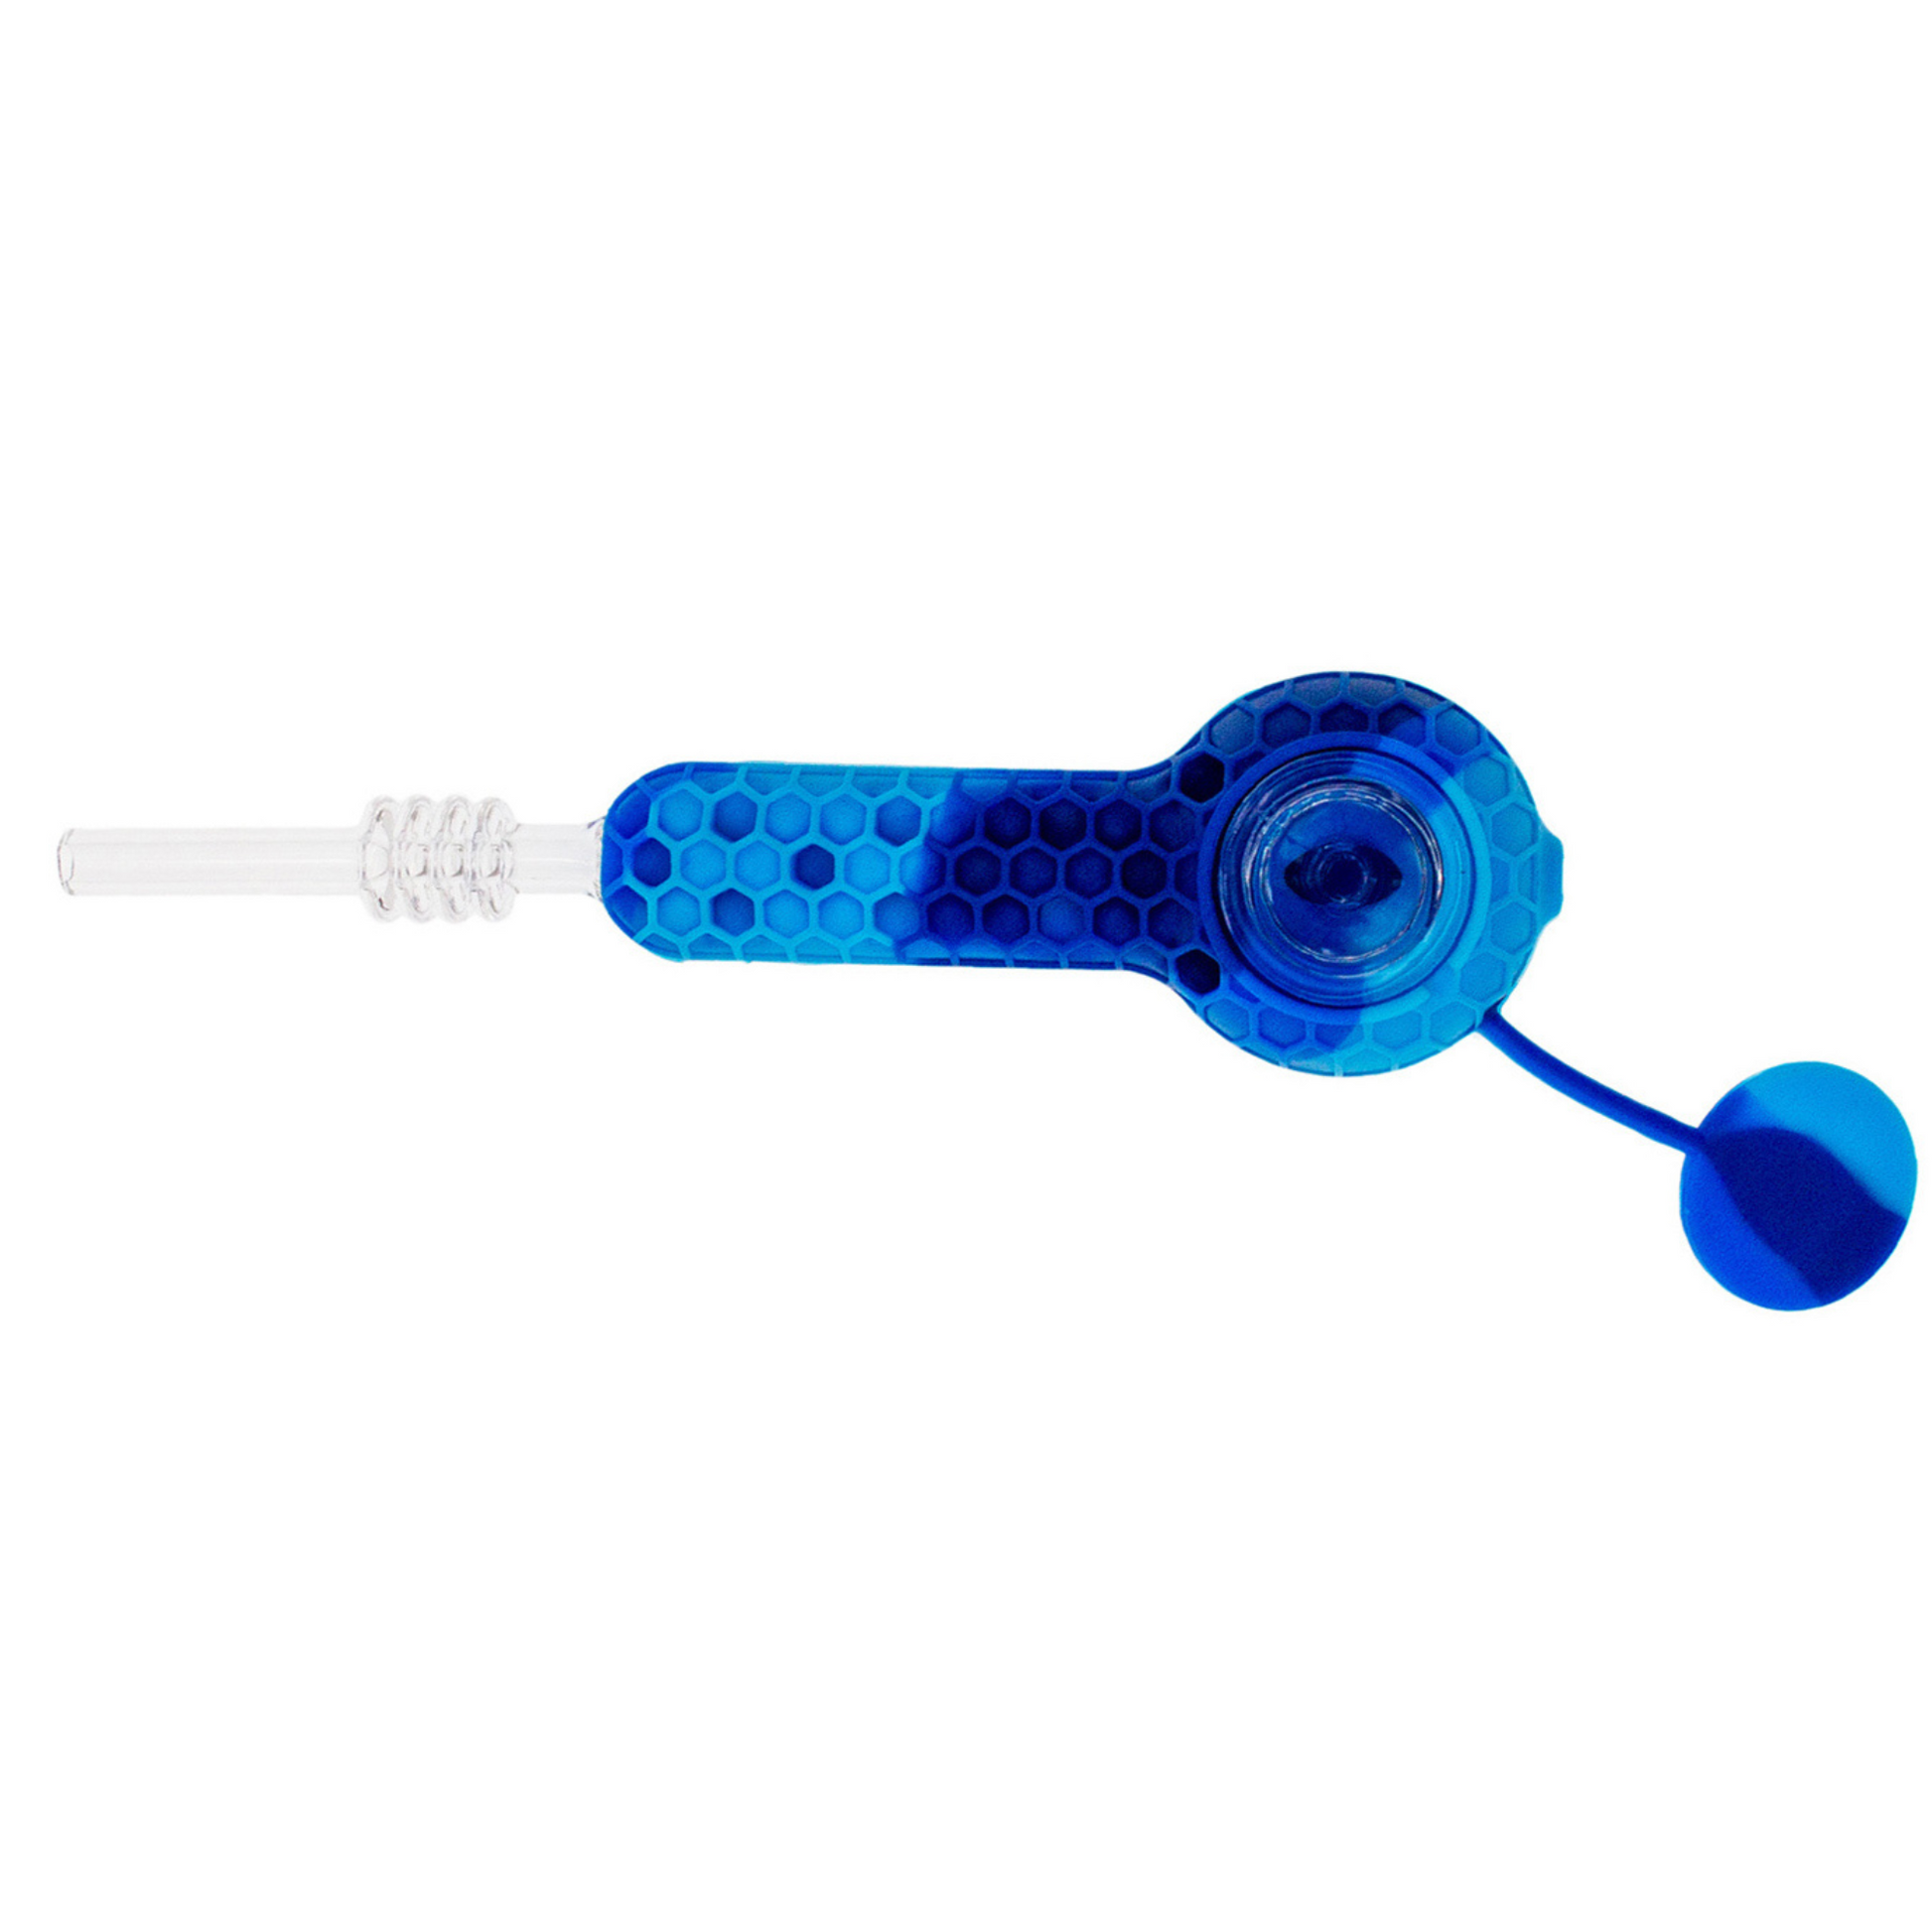 Stratus 2 In 1 Silicone Pipe For Dry & Wax - 70 Grams - 4.5 Inches